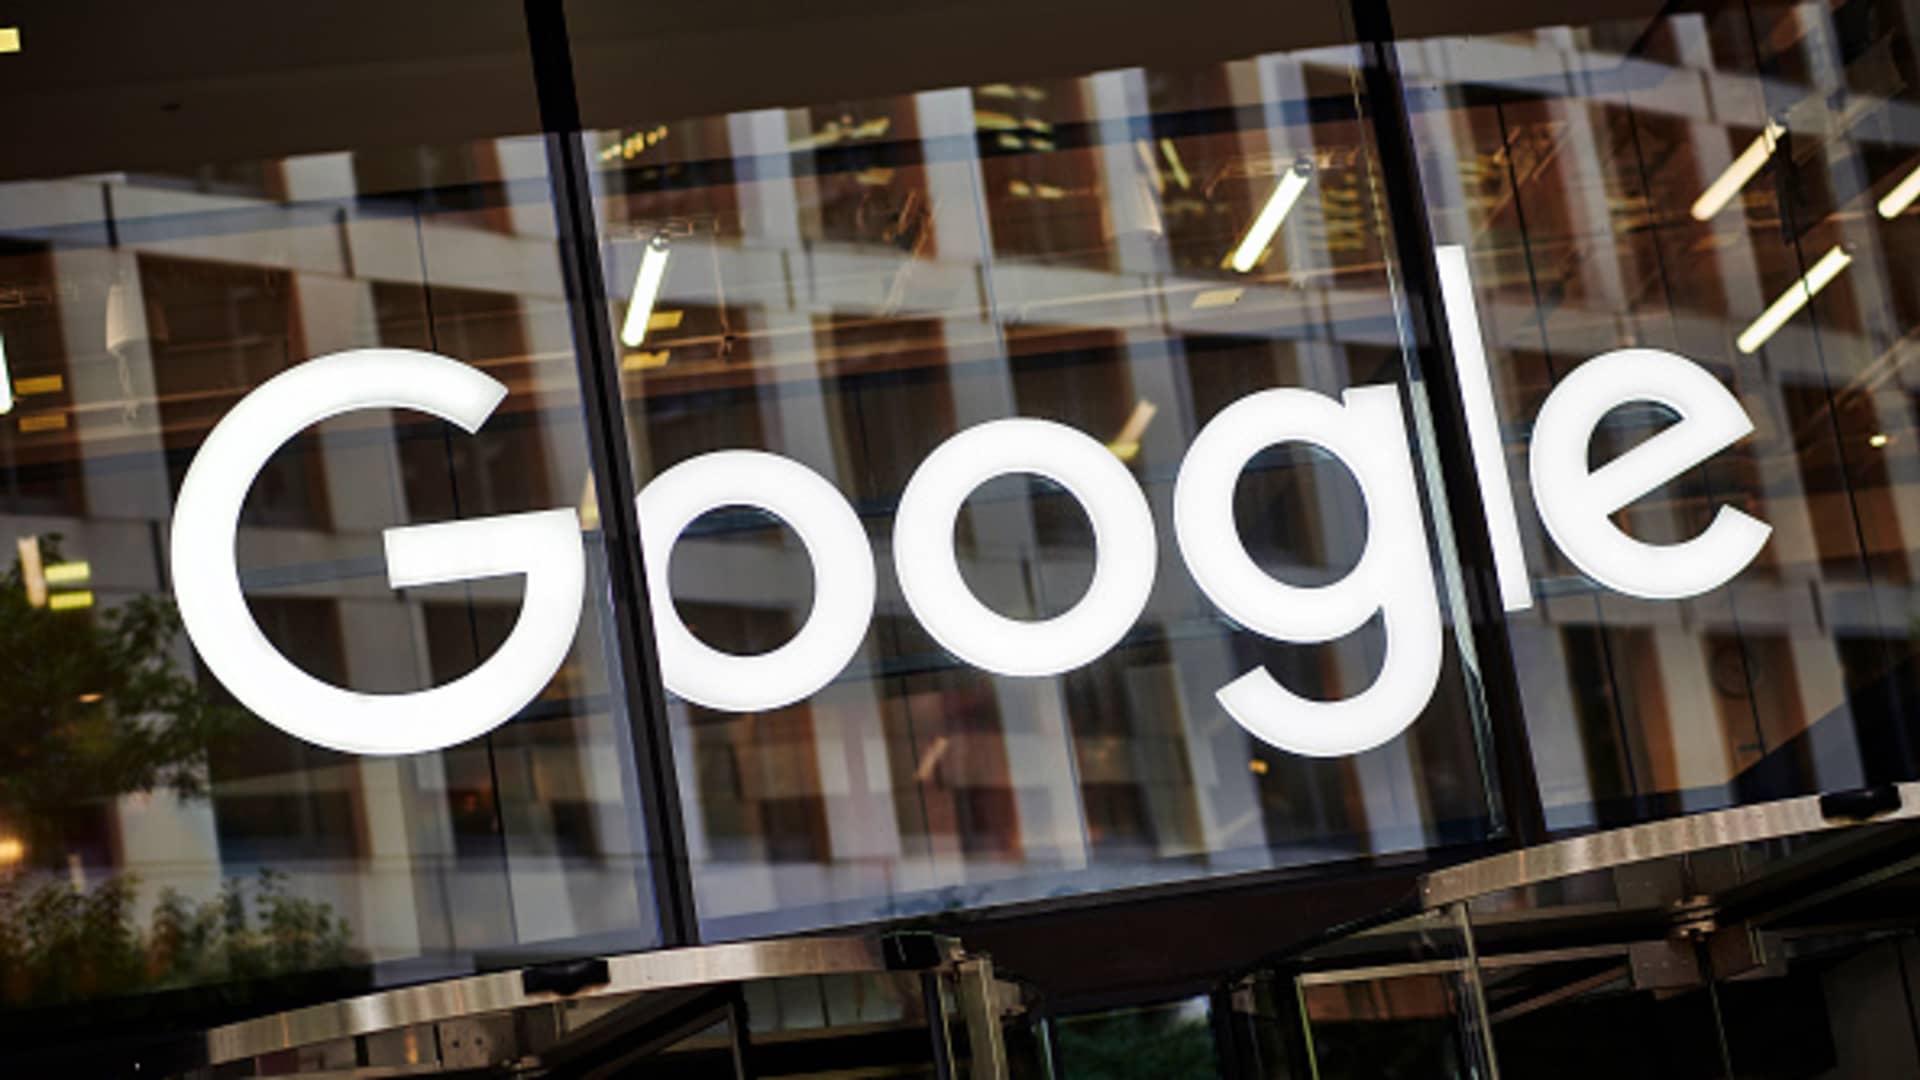 Google outage reported by thousands of users around the world